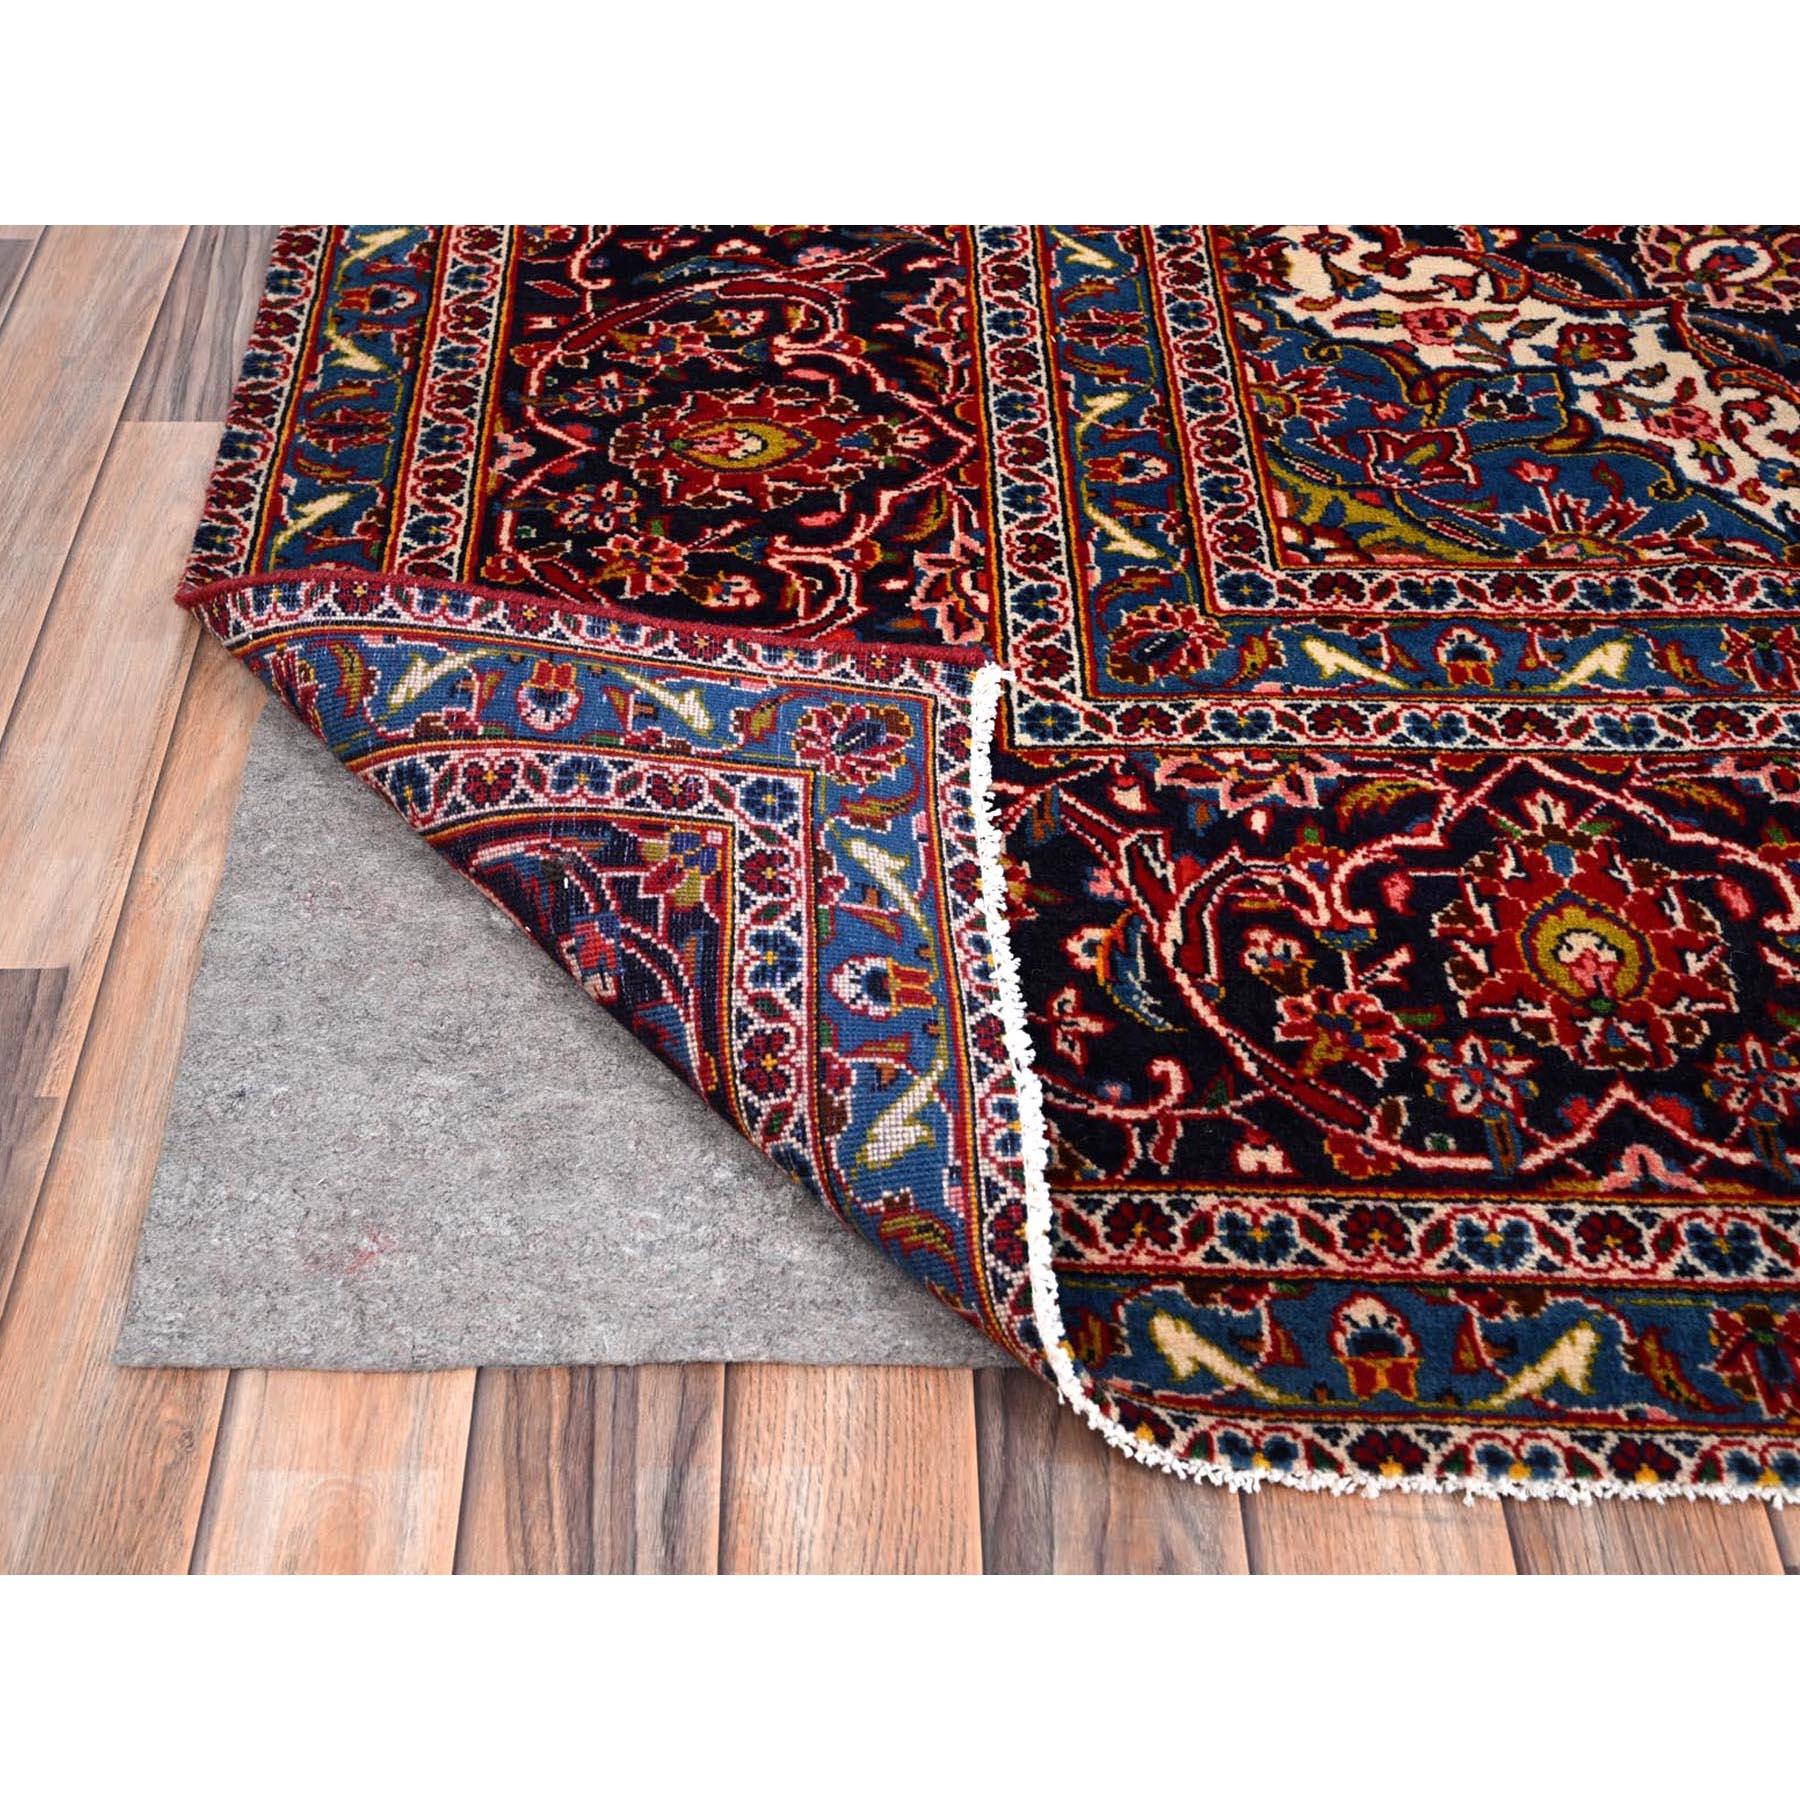 Red Pure Wool Vintage Persian Kashan Medallion Design 200 KPSI Hand Knotted Rug In Good Condition For Sale In Carlstadt, NJ